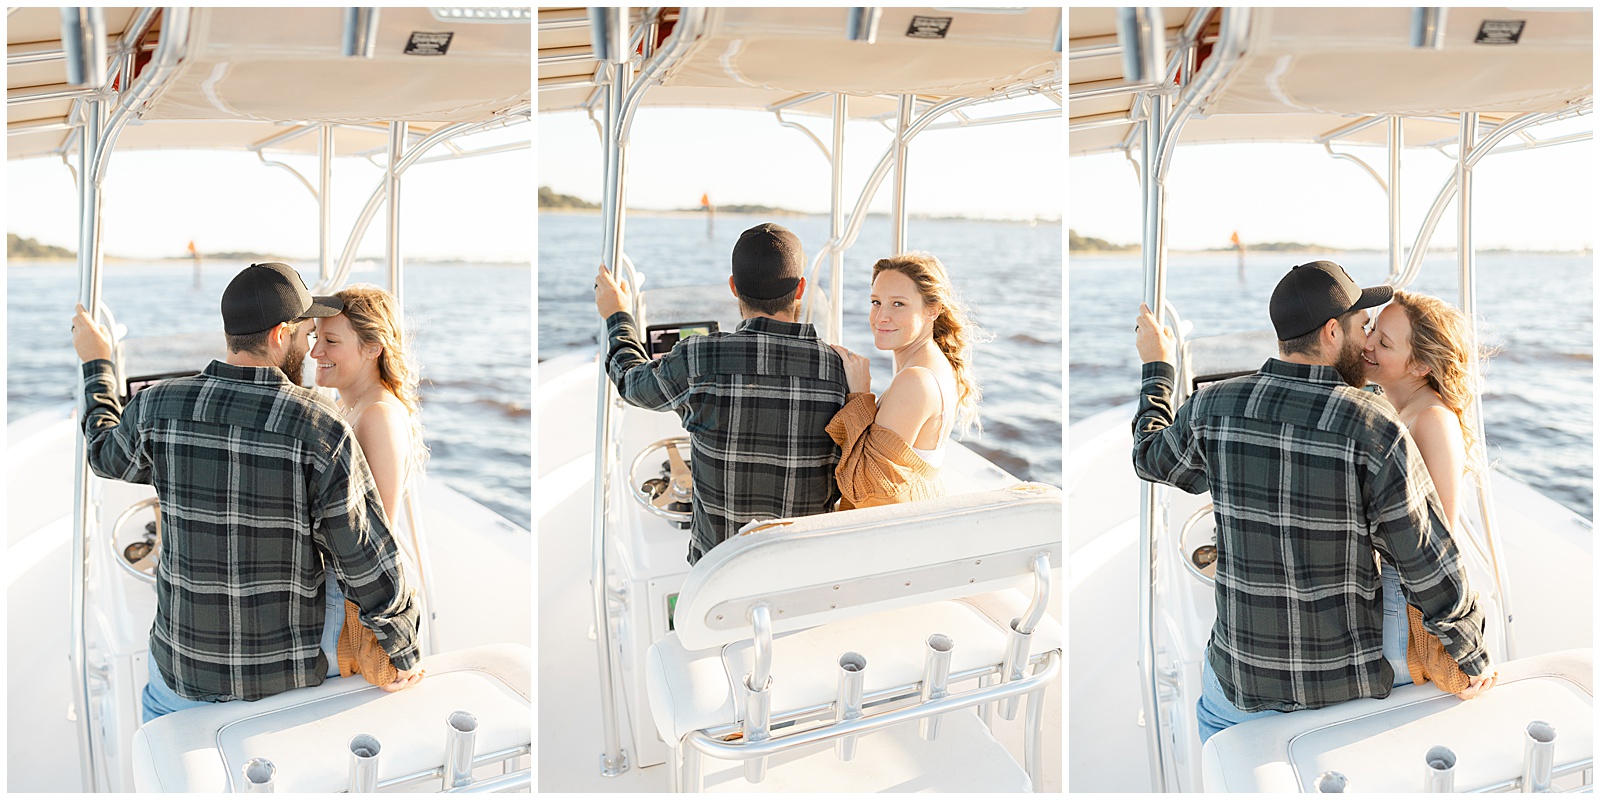 jacksonville florida couples boat anniversary photo session with tabitha baldwin photography_0003.jpg